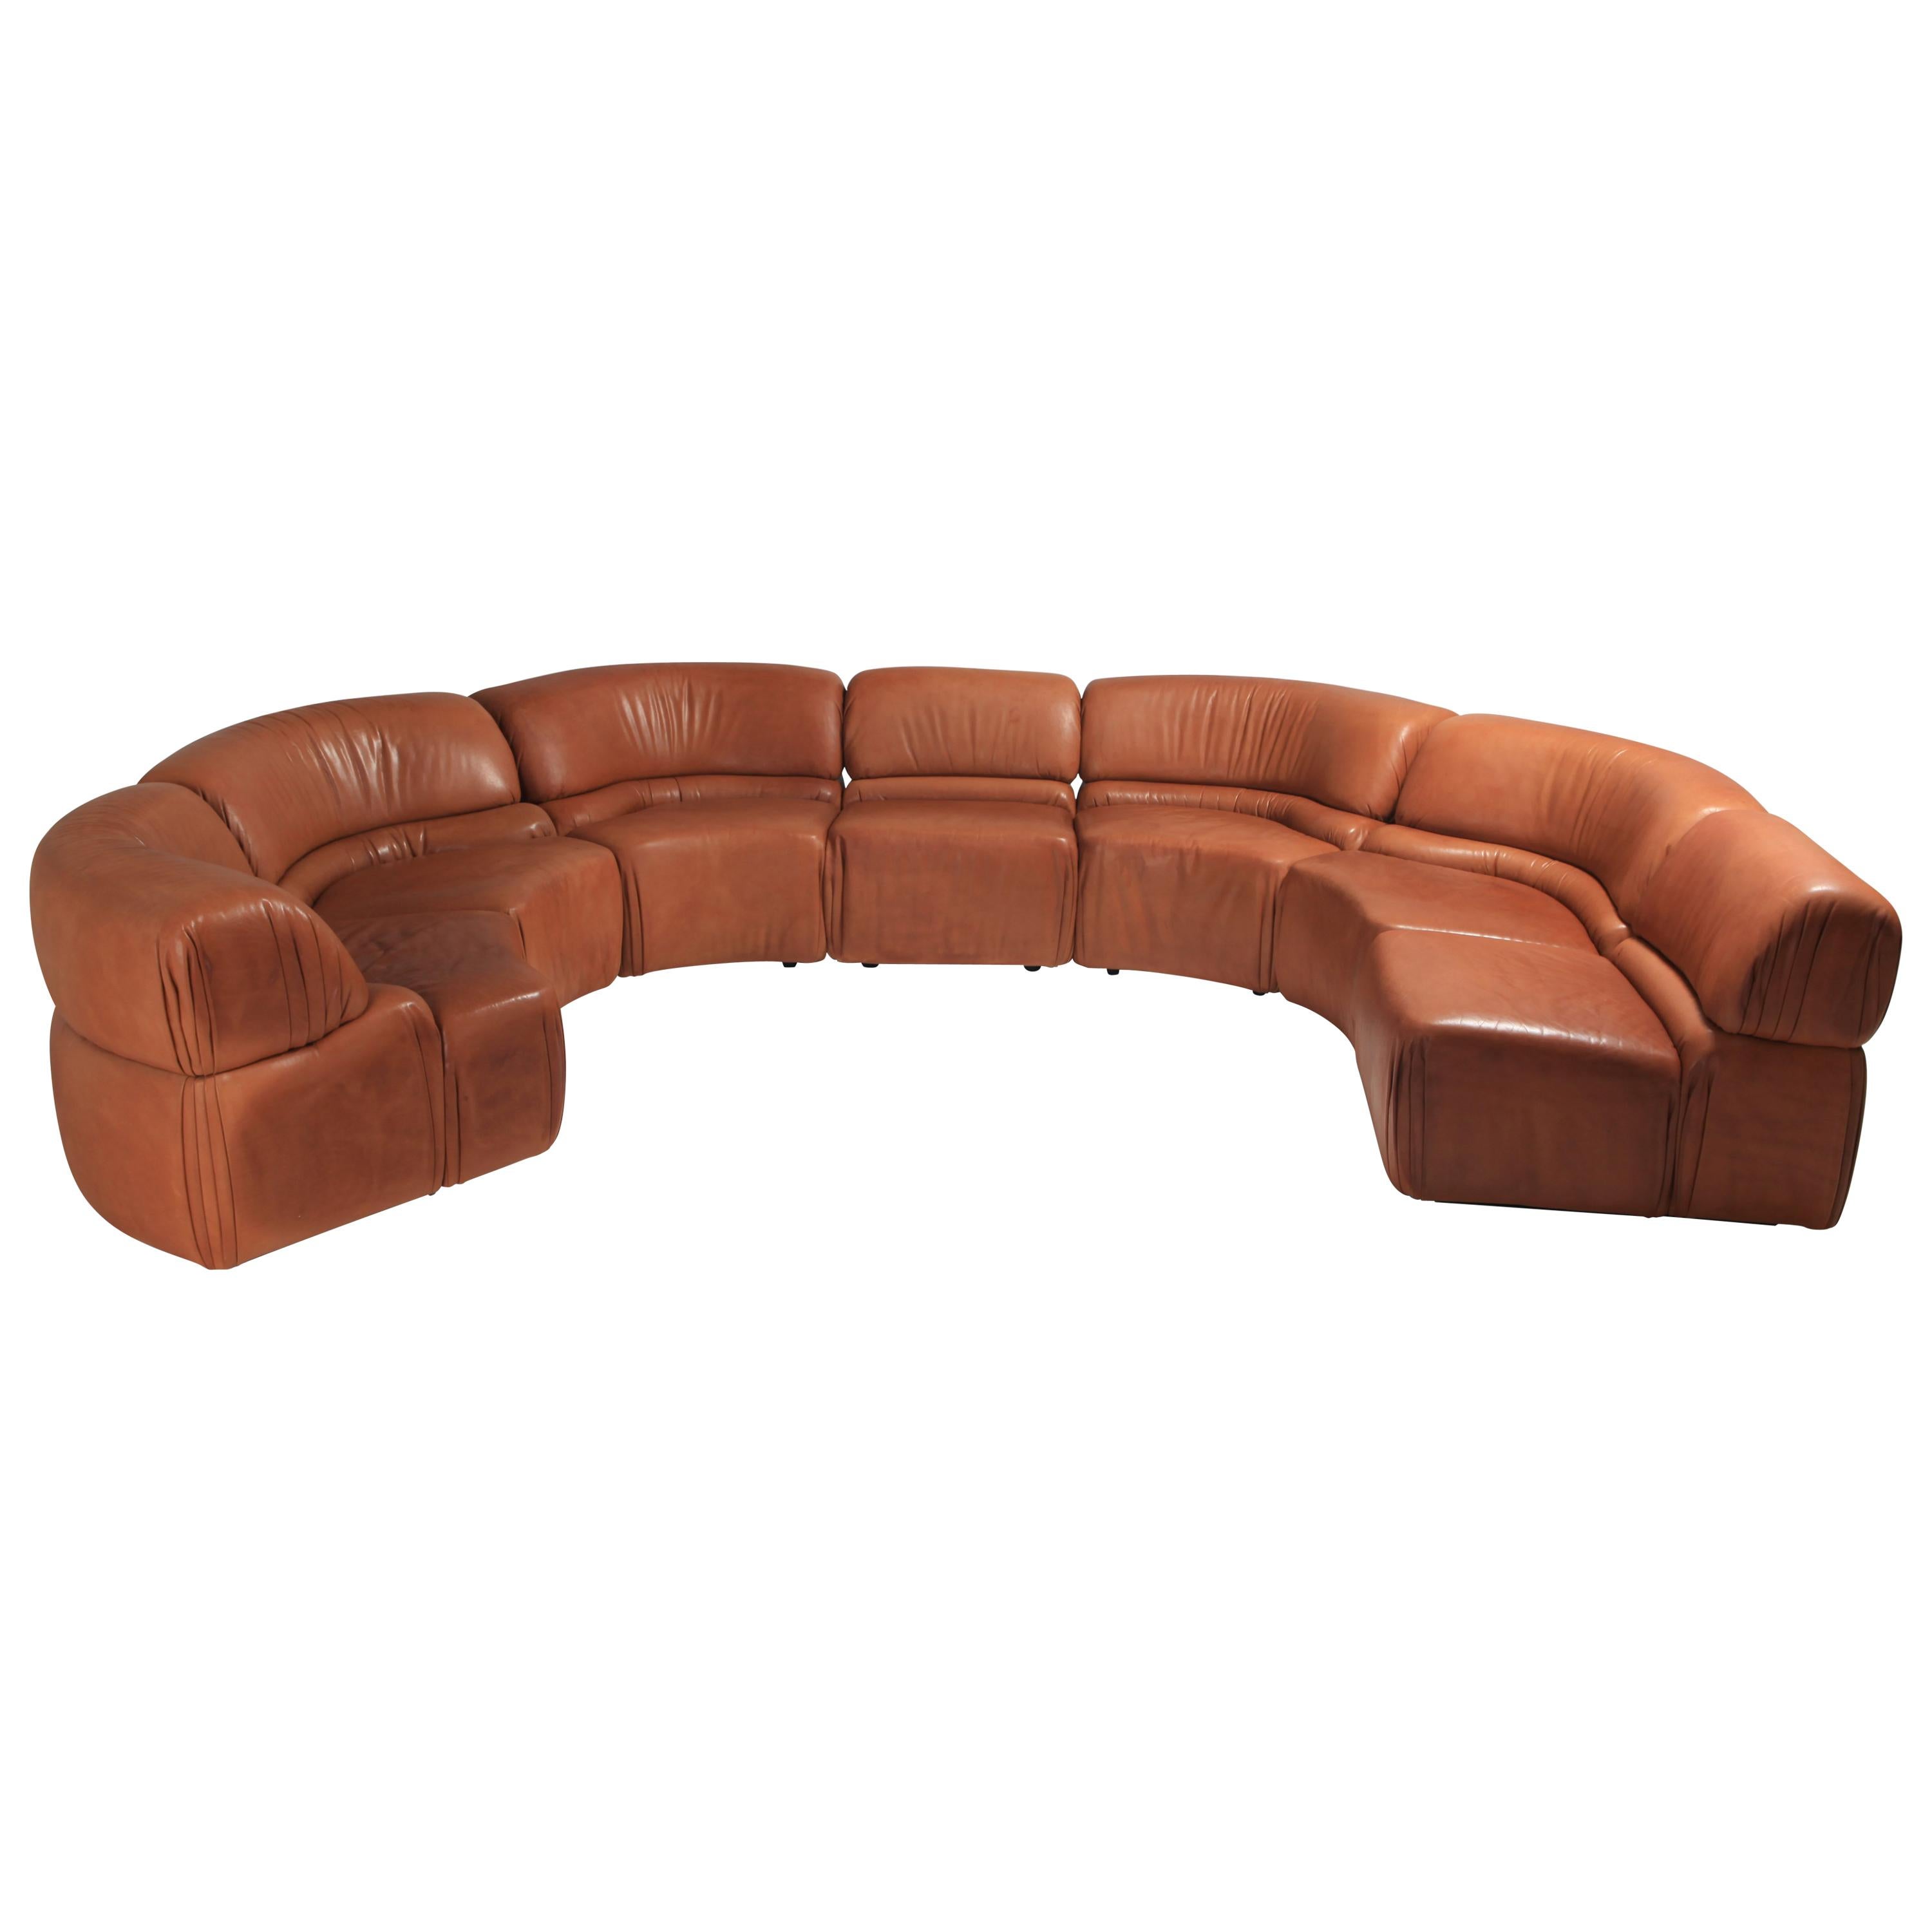 De Sede 'Cosmos' sofa in original cognac leather.

Iconic and stunning sectional sofa consisting of 7 pieces by Swiss leading luxury leather manufacturer De Sede.
A 1970s Mid-Century Modern high end piece in great condition.

De Sede once